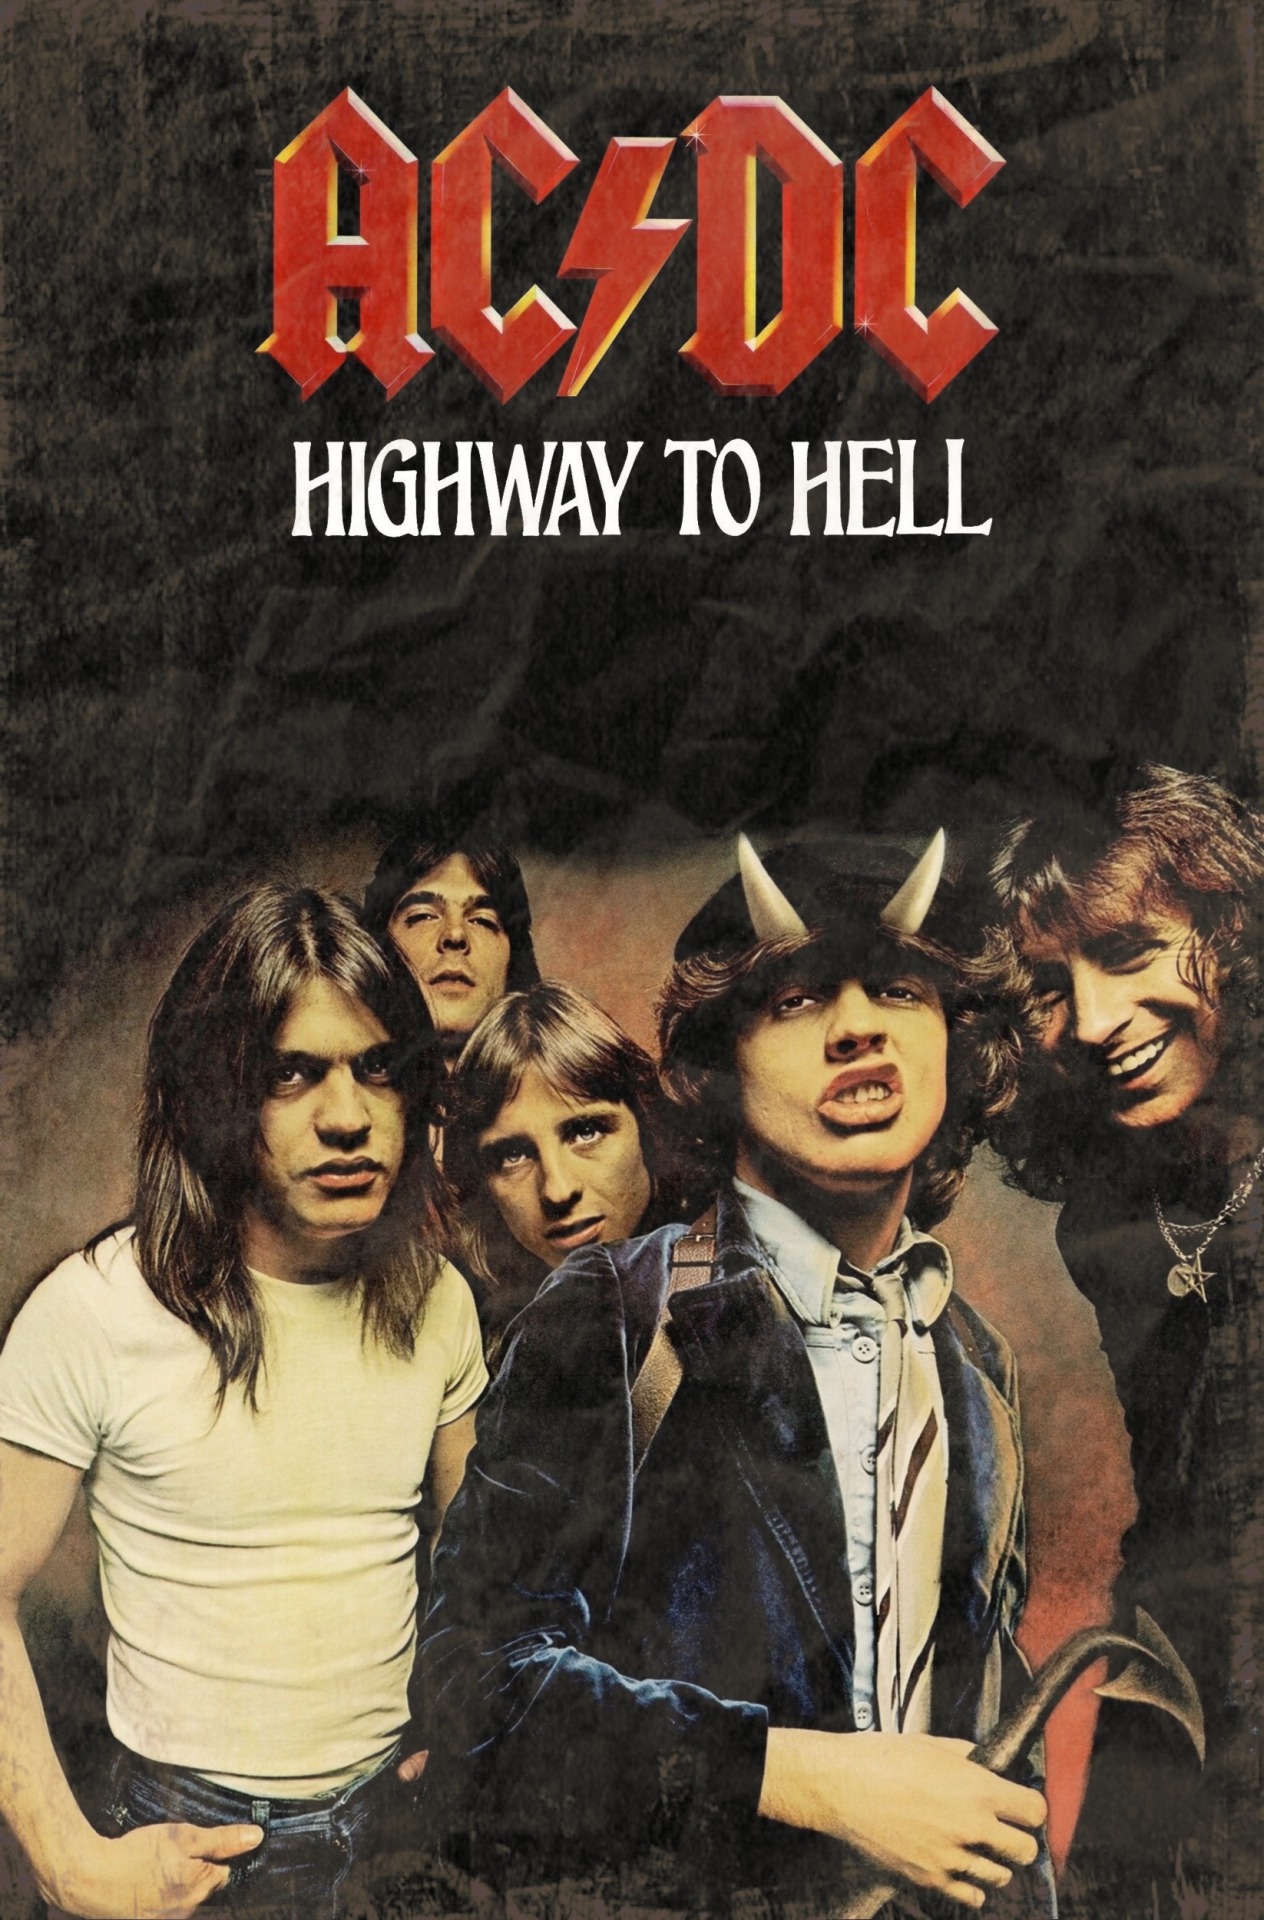 Acdc highway to hell. ACDC. AC/DC – Highway to Hell. AC DC Highway to Hell 1979 обложка CD. Обложка альбома Highway to Hell.